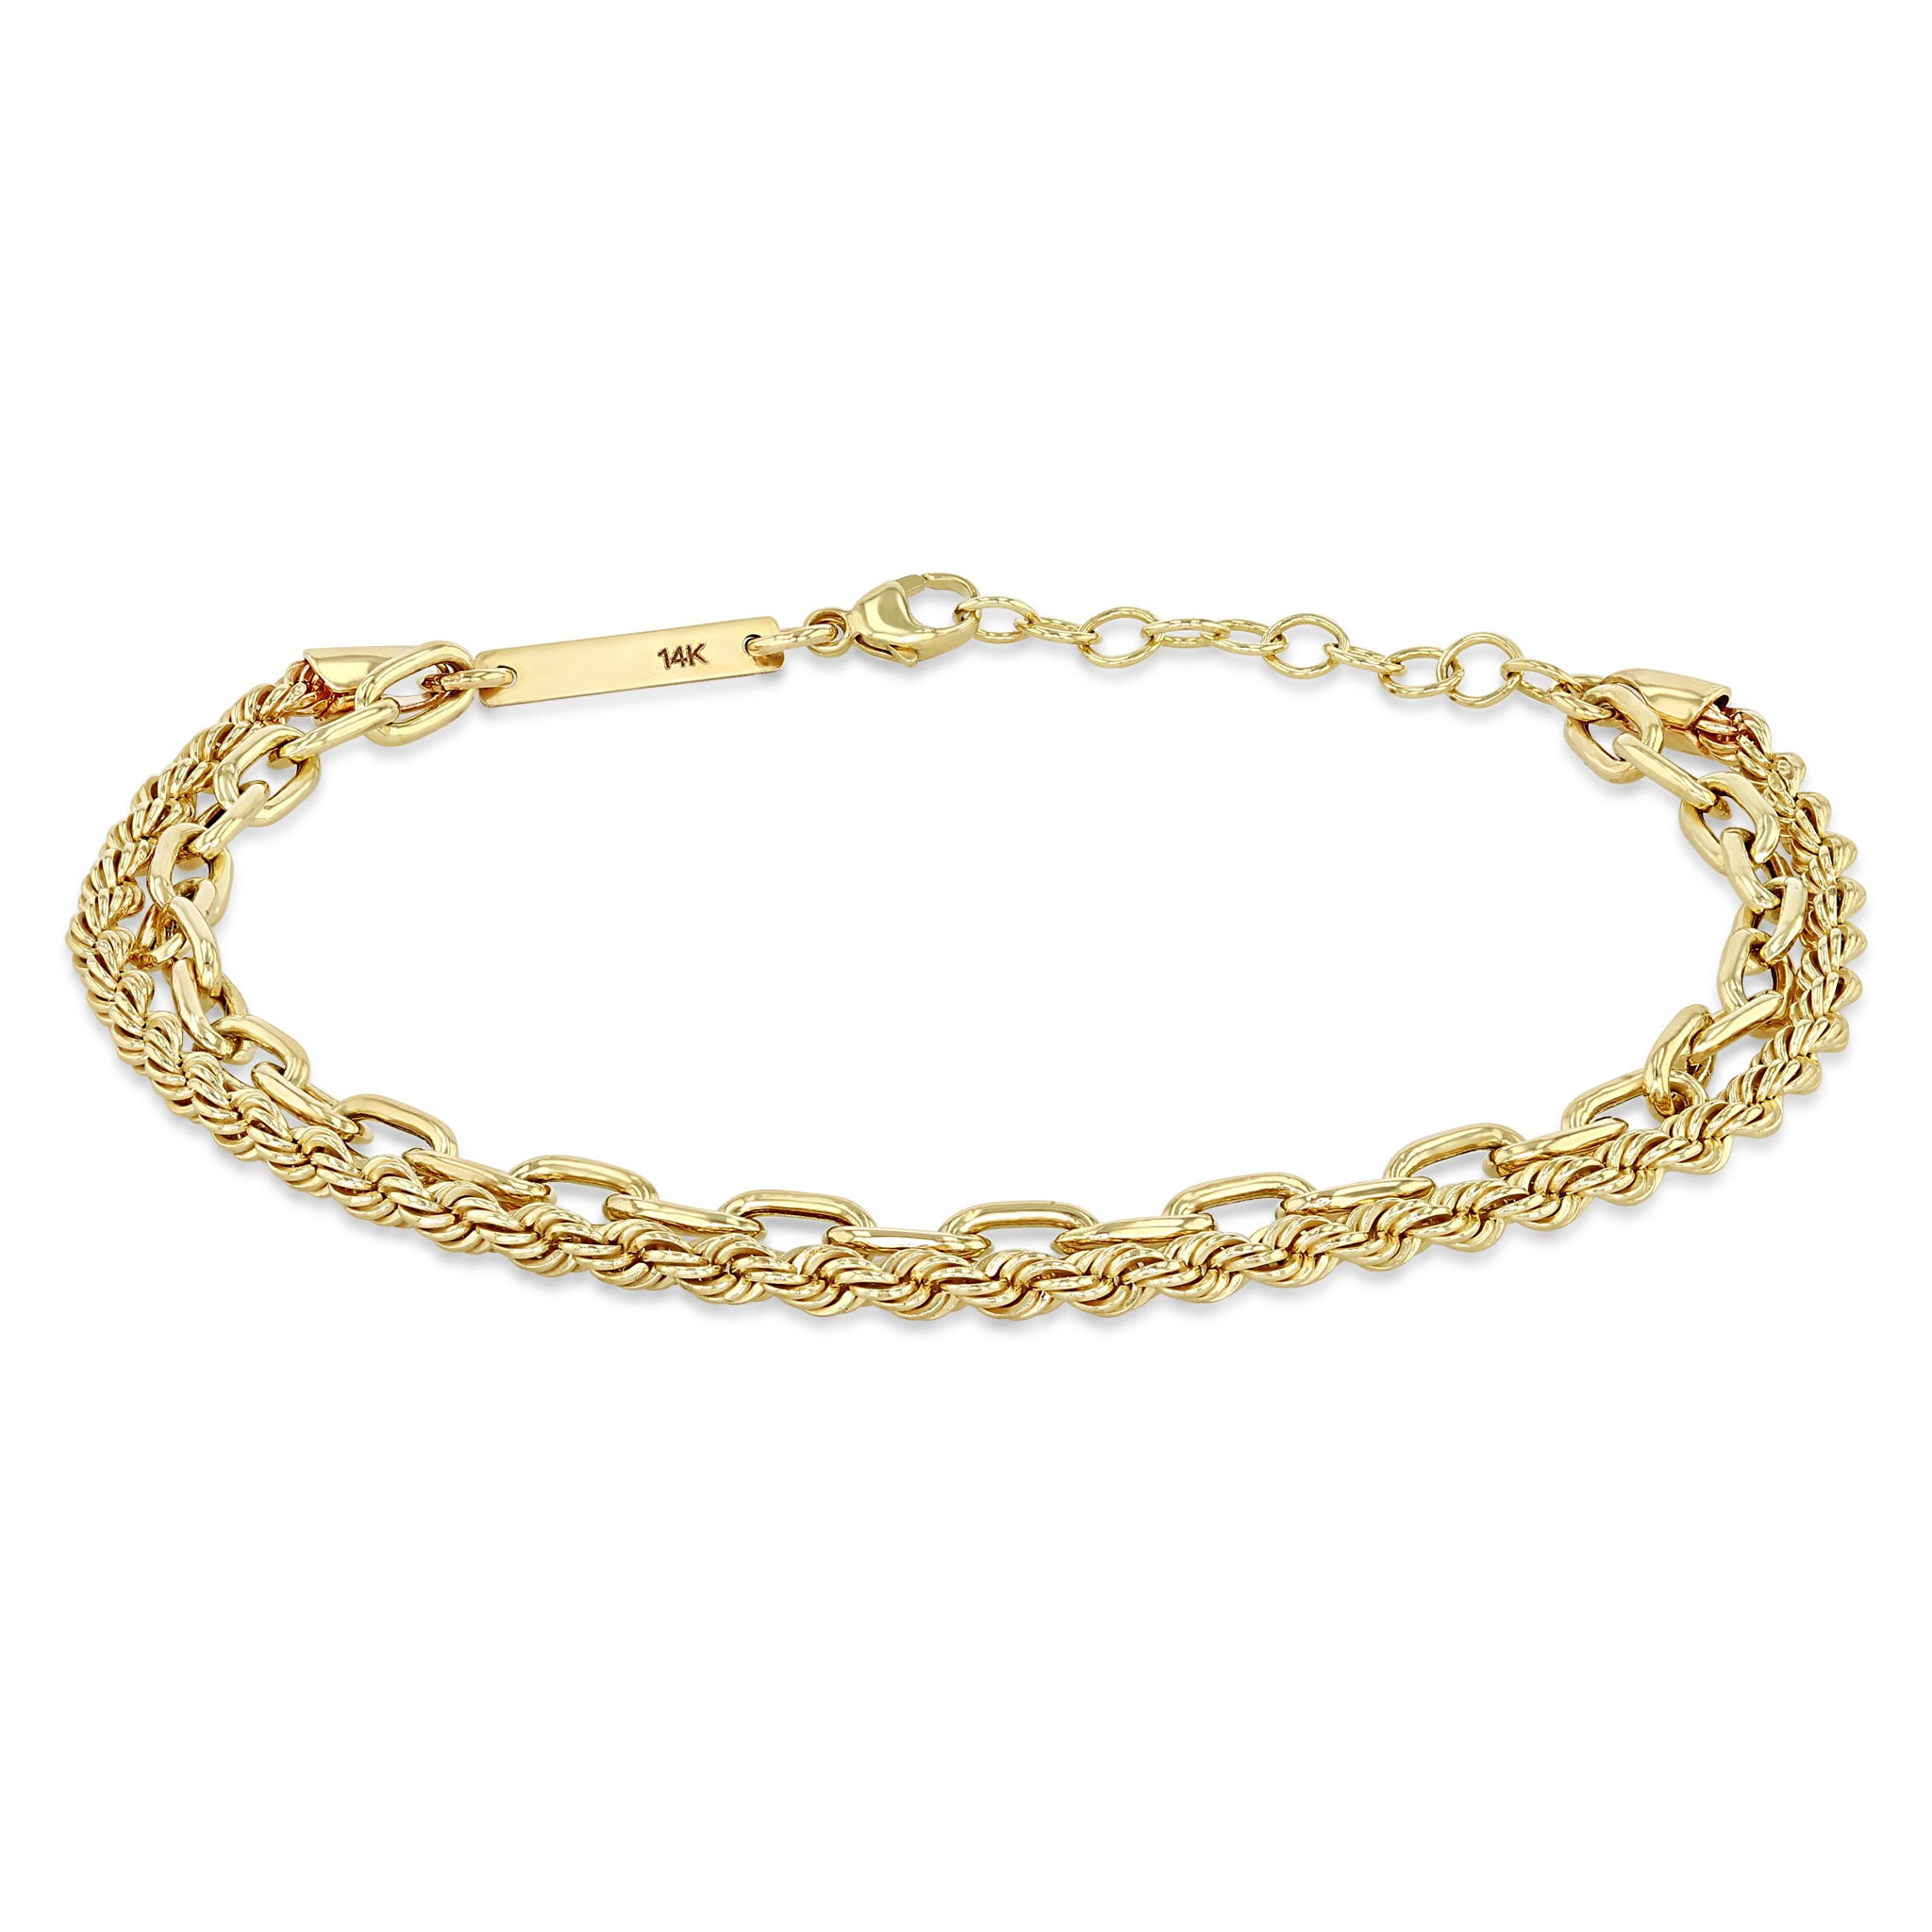 Zoë Chicco 14k Gold Medium Rope & Square Oval Link Double